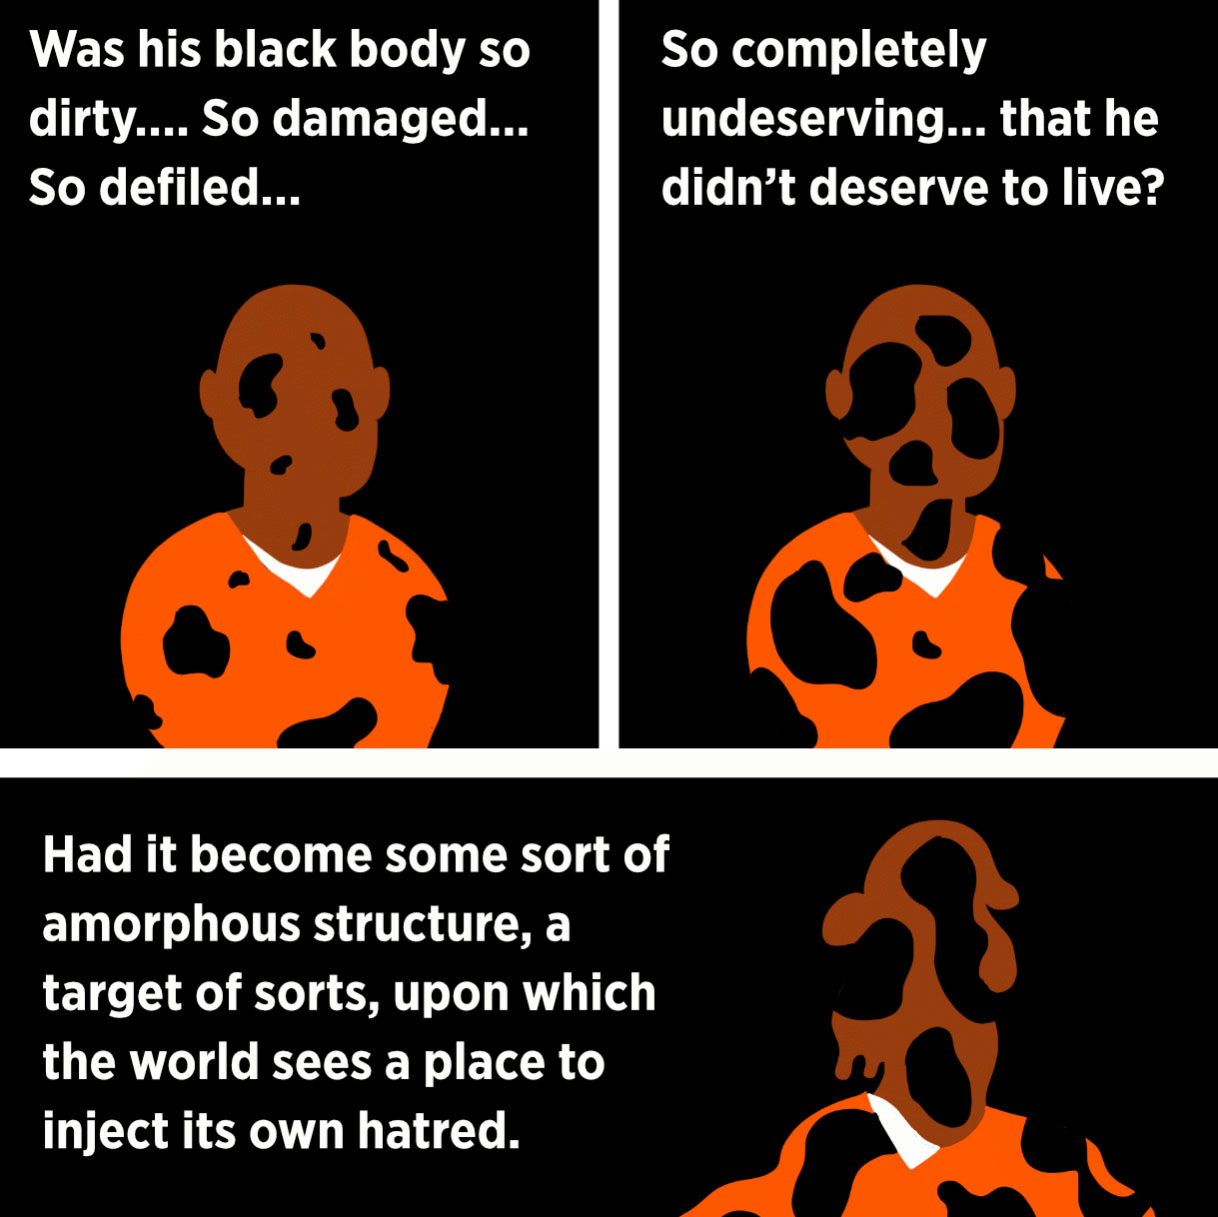 Excerpt of a comic where a brown person is disintegrating, accompanied by text narration describing a black body becoming damaged and amorphous